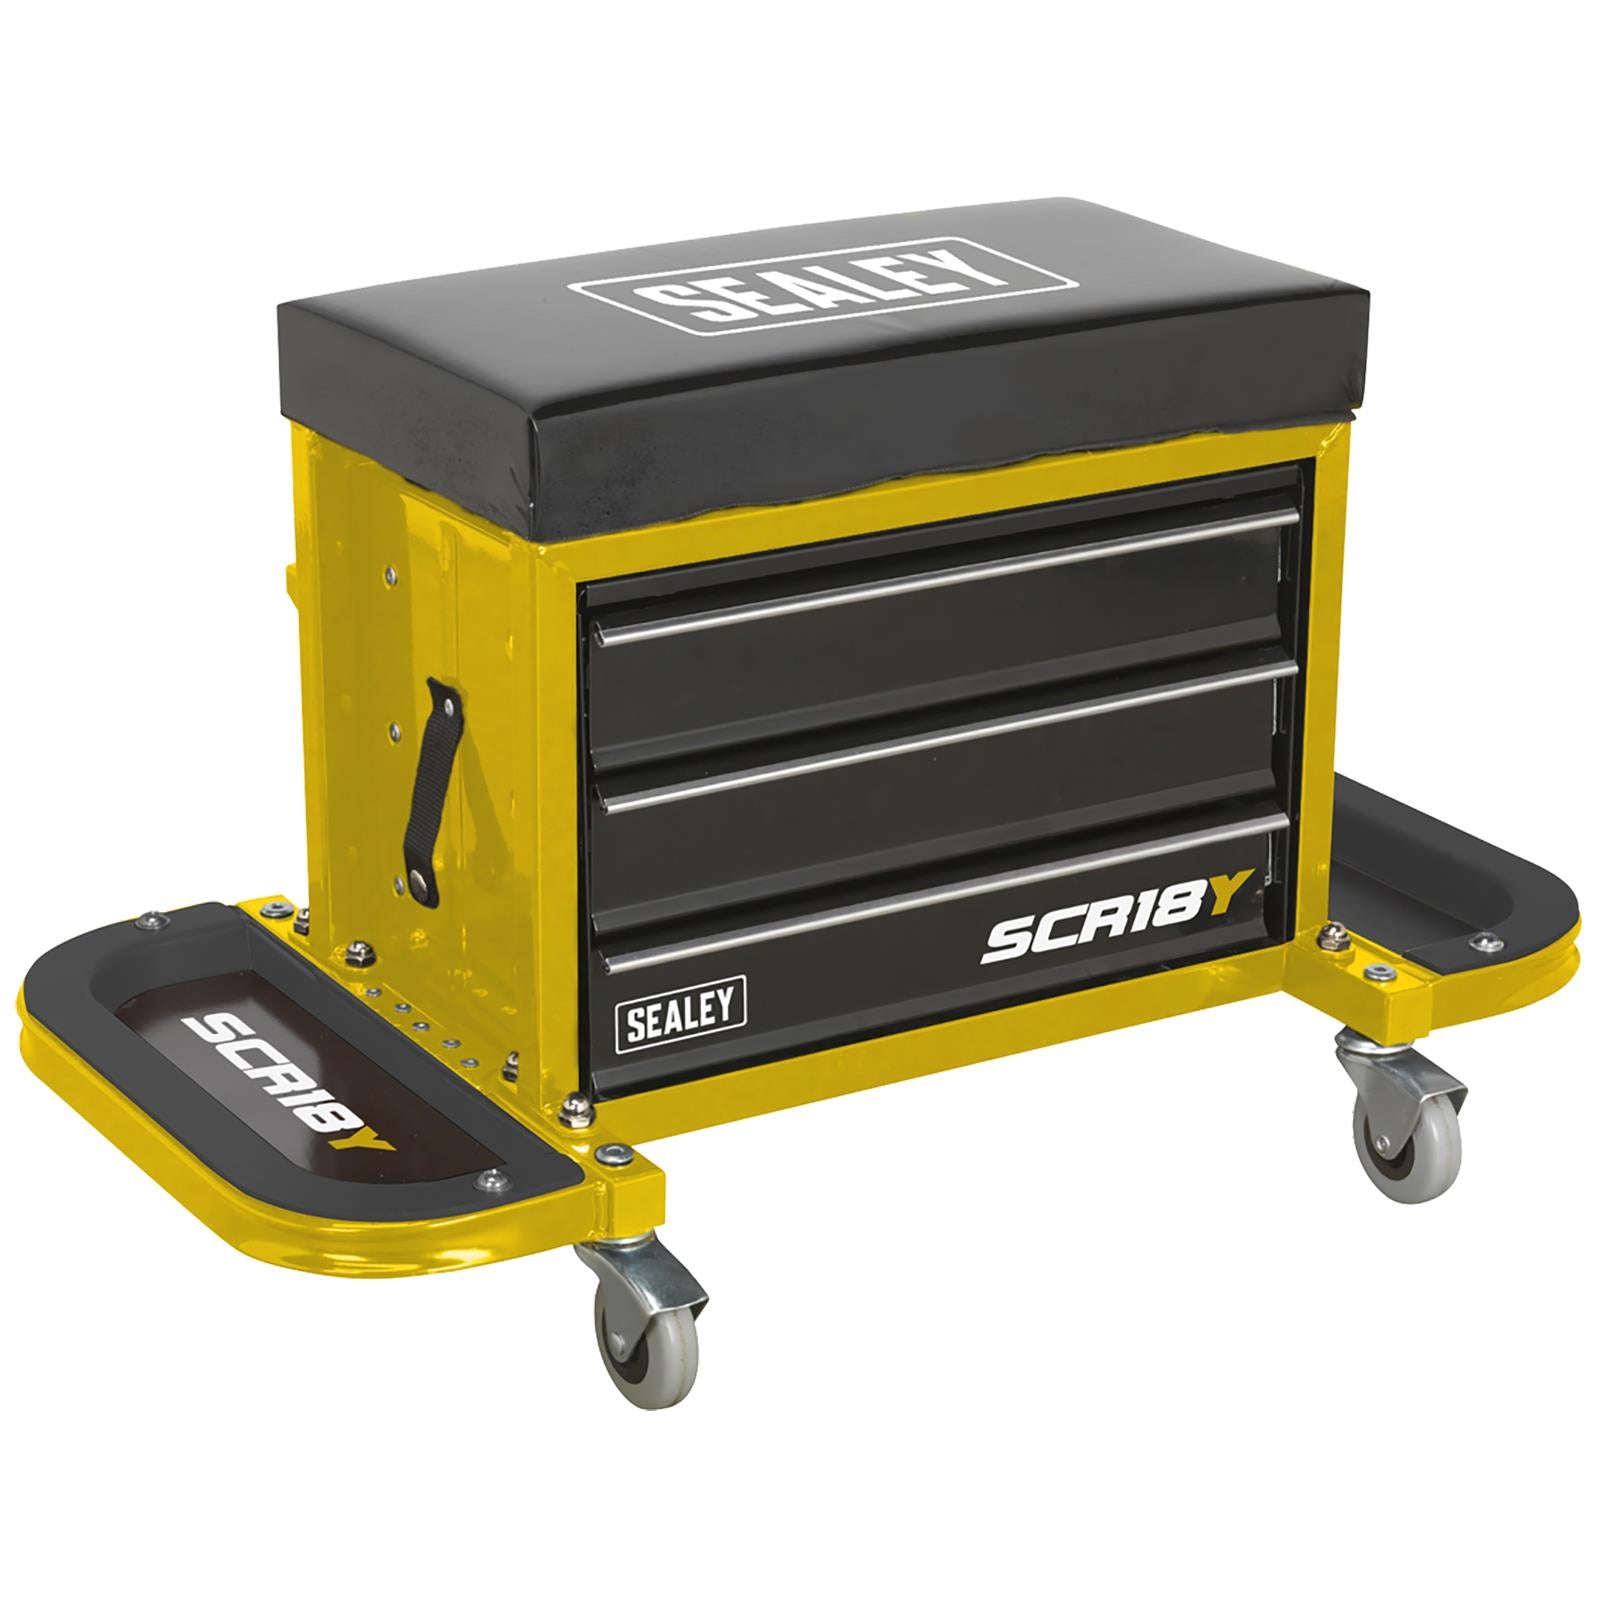 Sealey Mechanics Rolling Utility Seat and Toolbox with Drawers Yellow